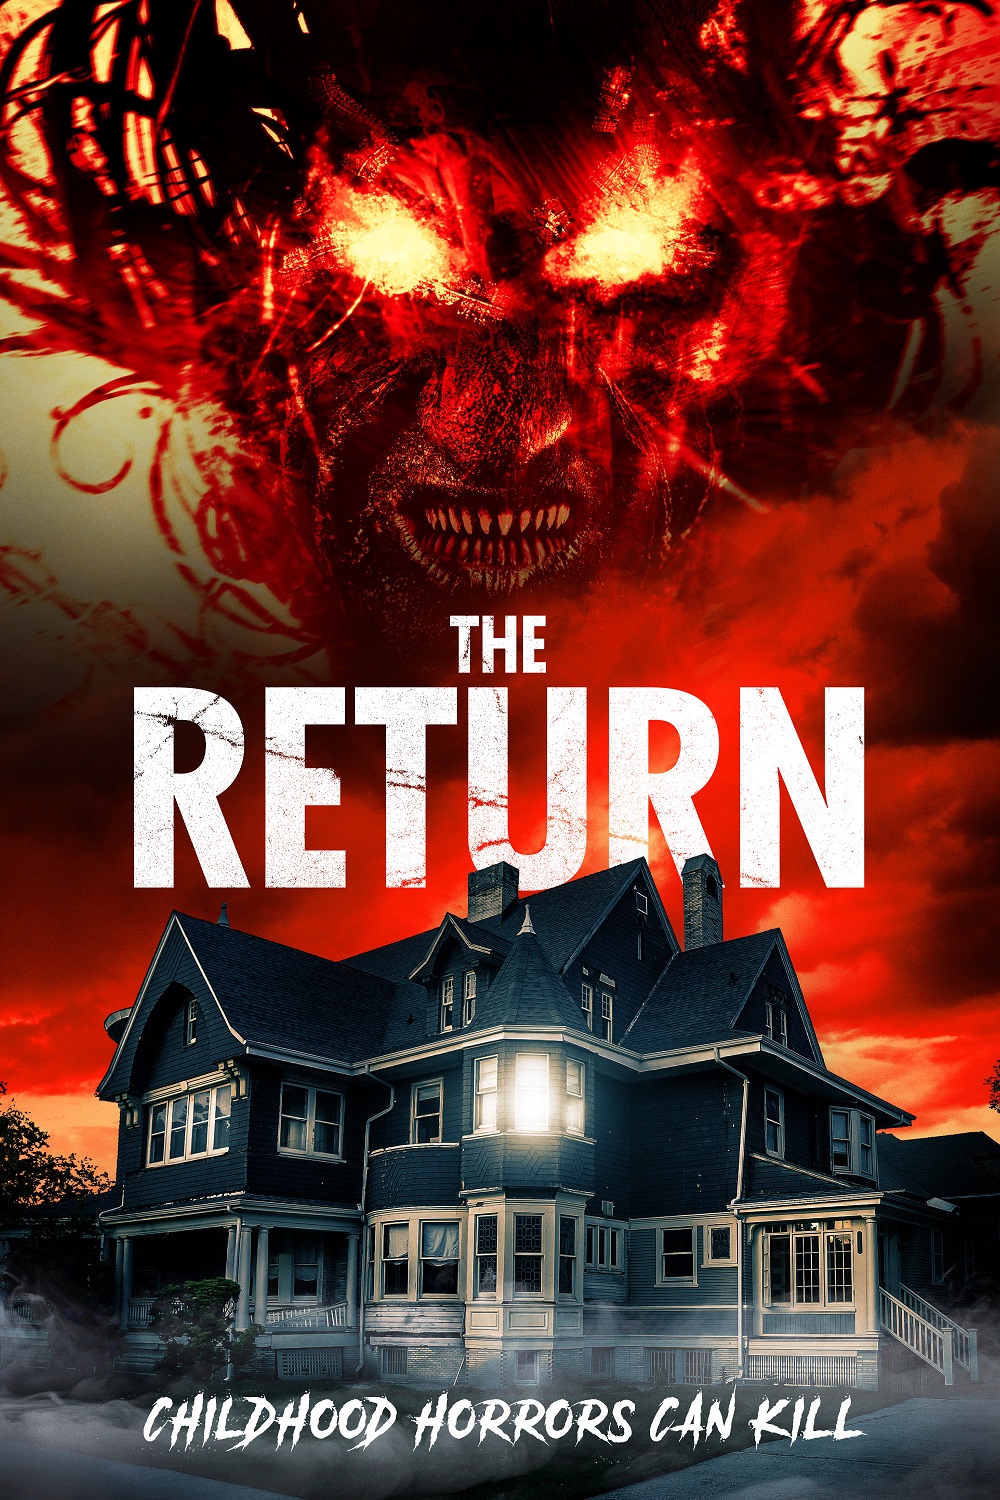 The Return poster (Courtesy of Uncork'd Entertainment)